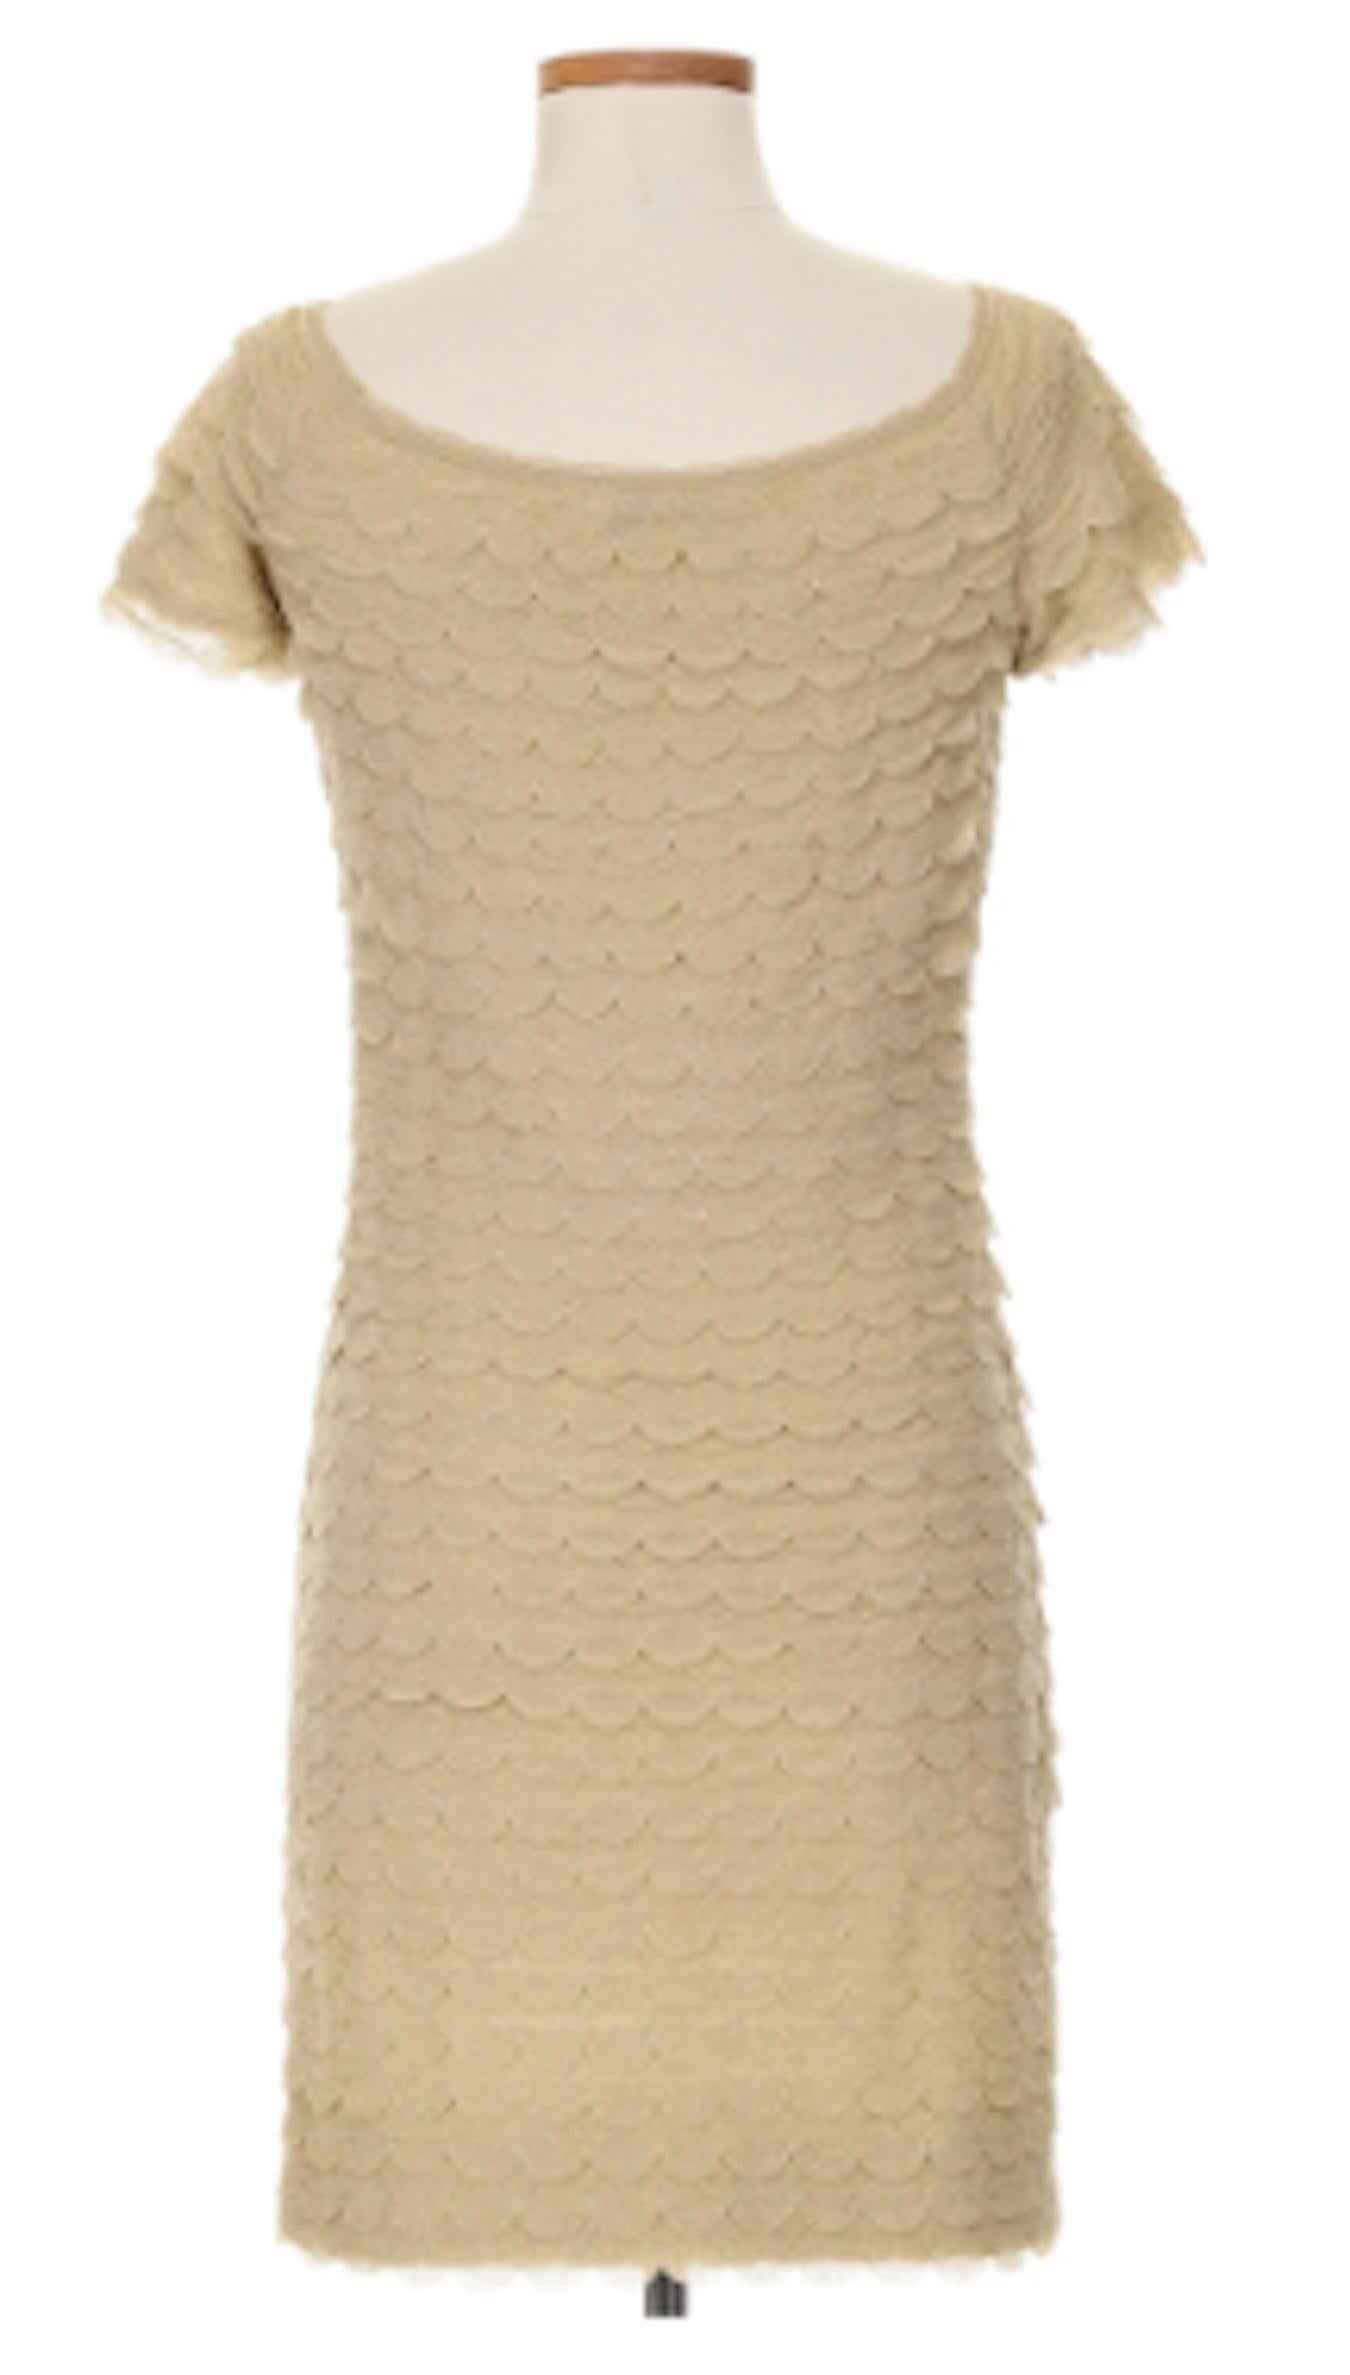 Christian Dior By John Galliano Knit Dress In Excellent Condition For Sale In New York, NY